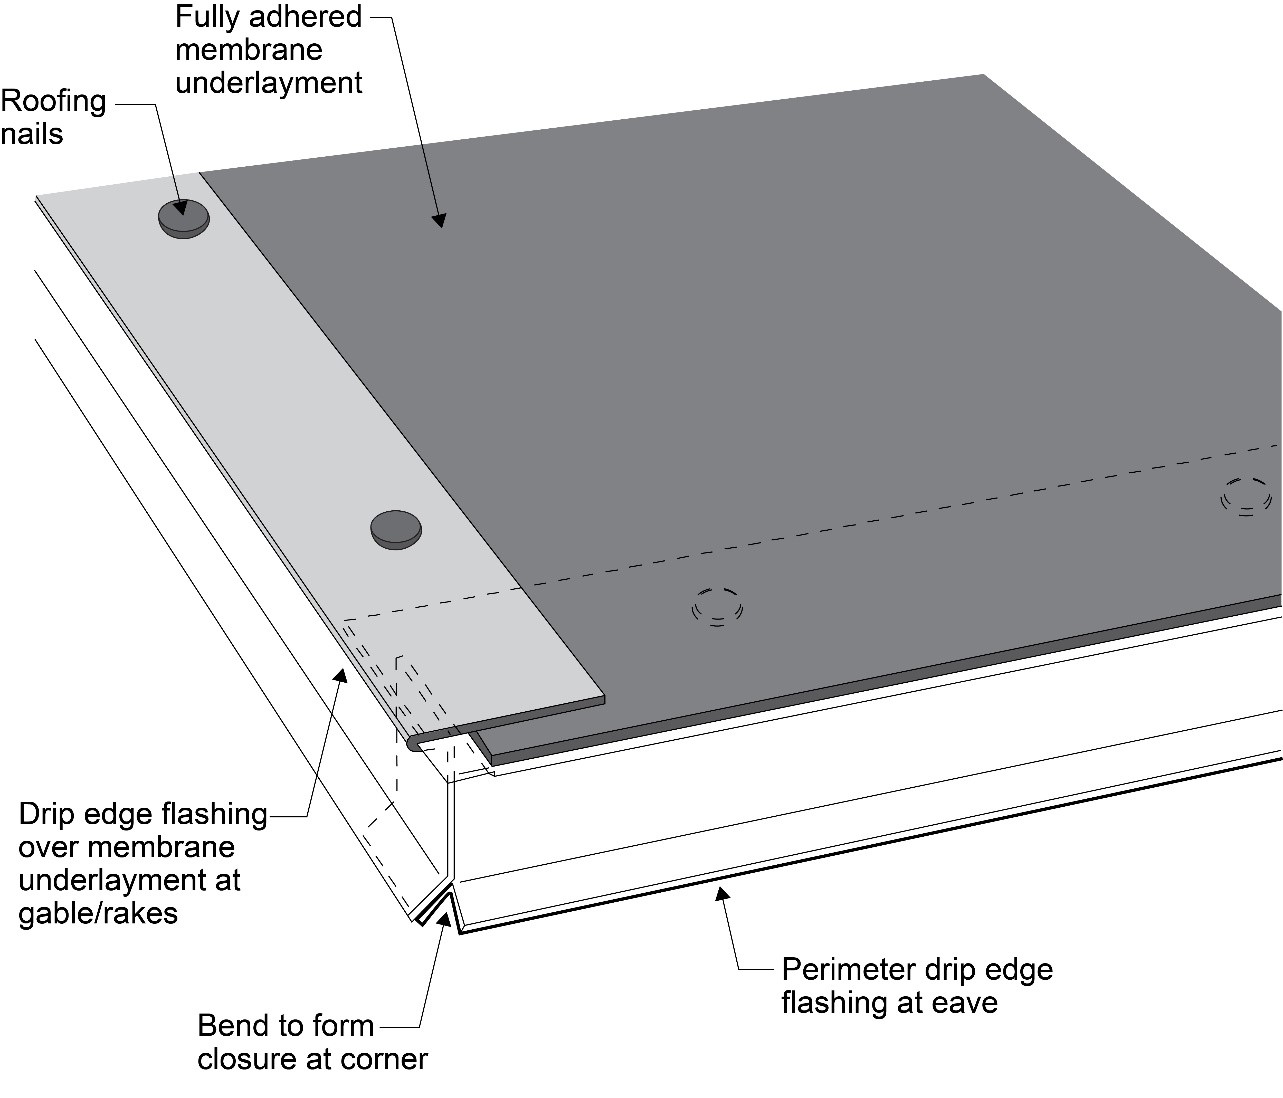 Right – Install metal drip edge at roof edges in high wind and rain areas.